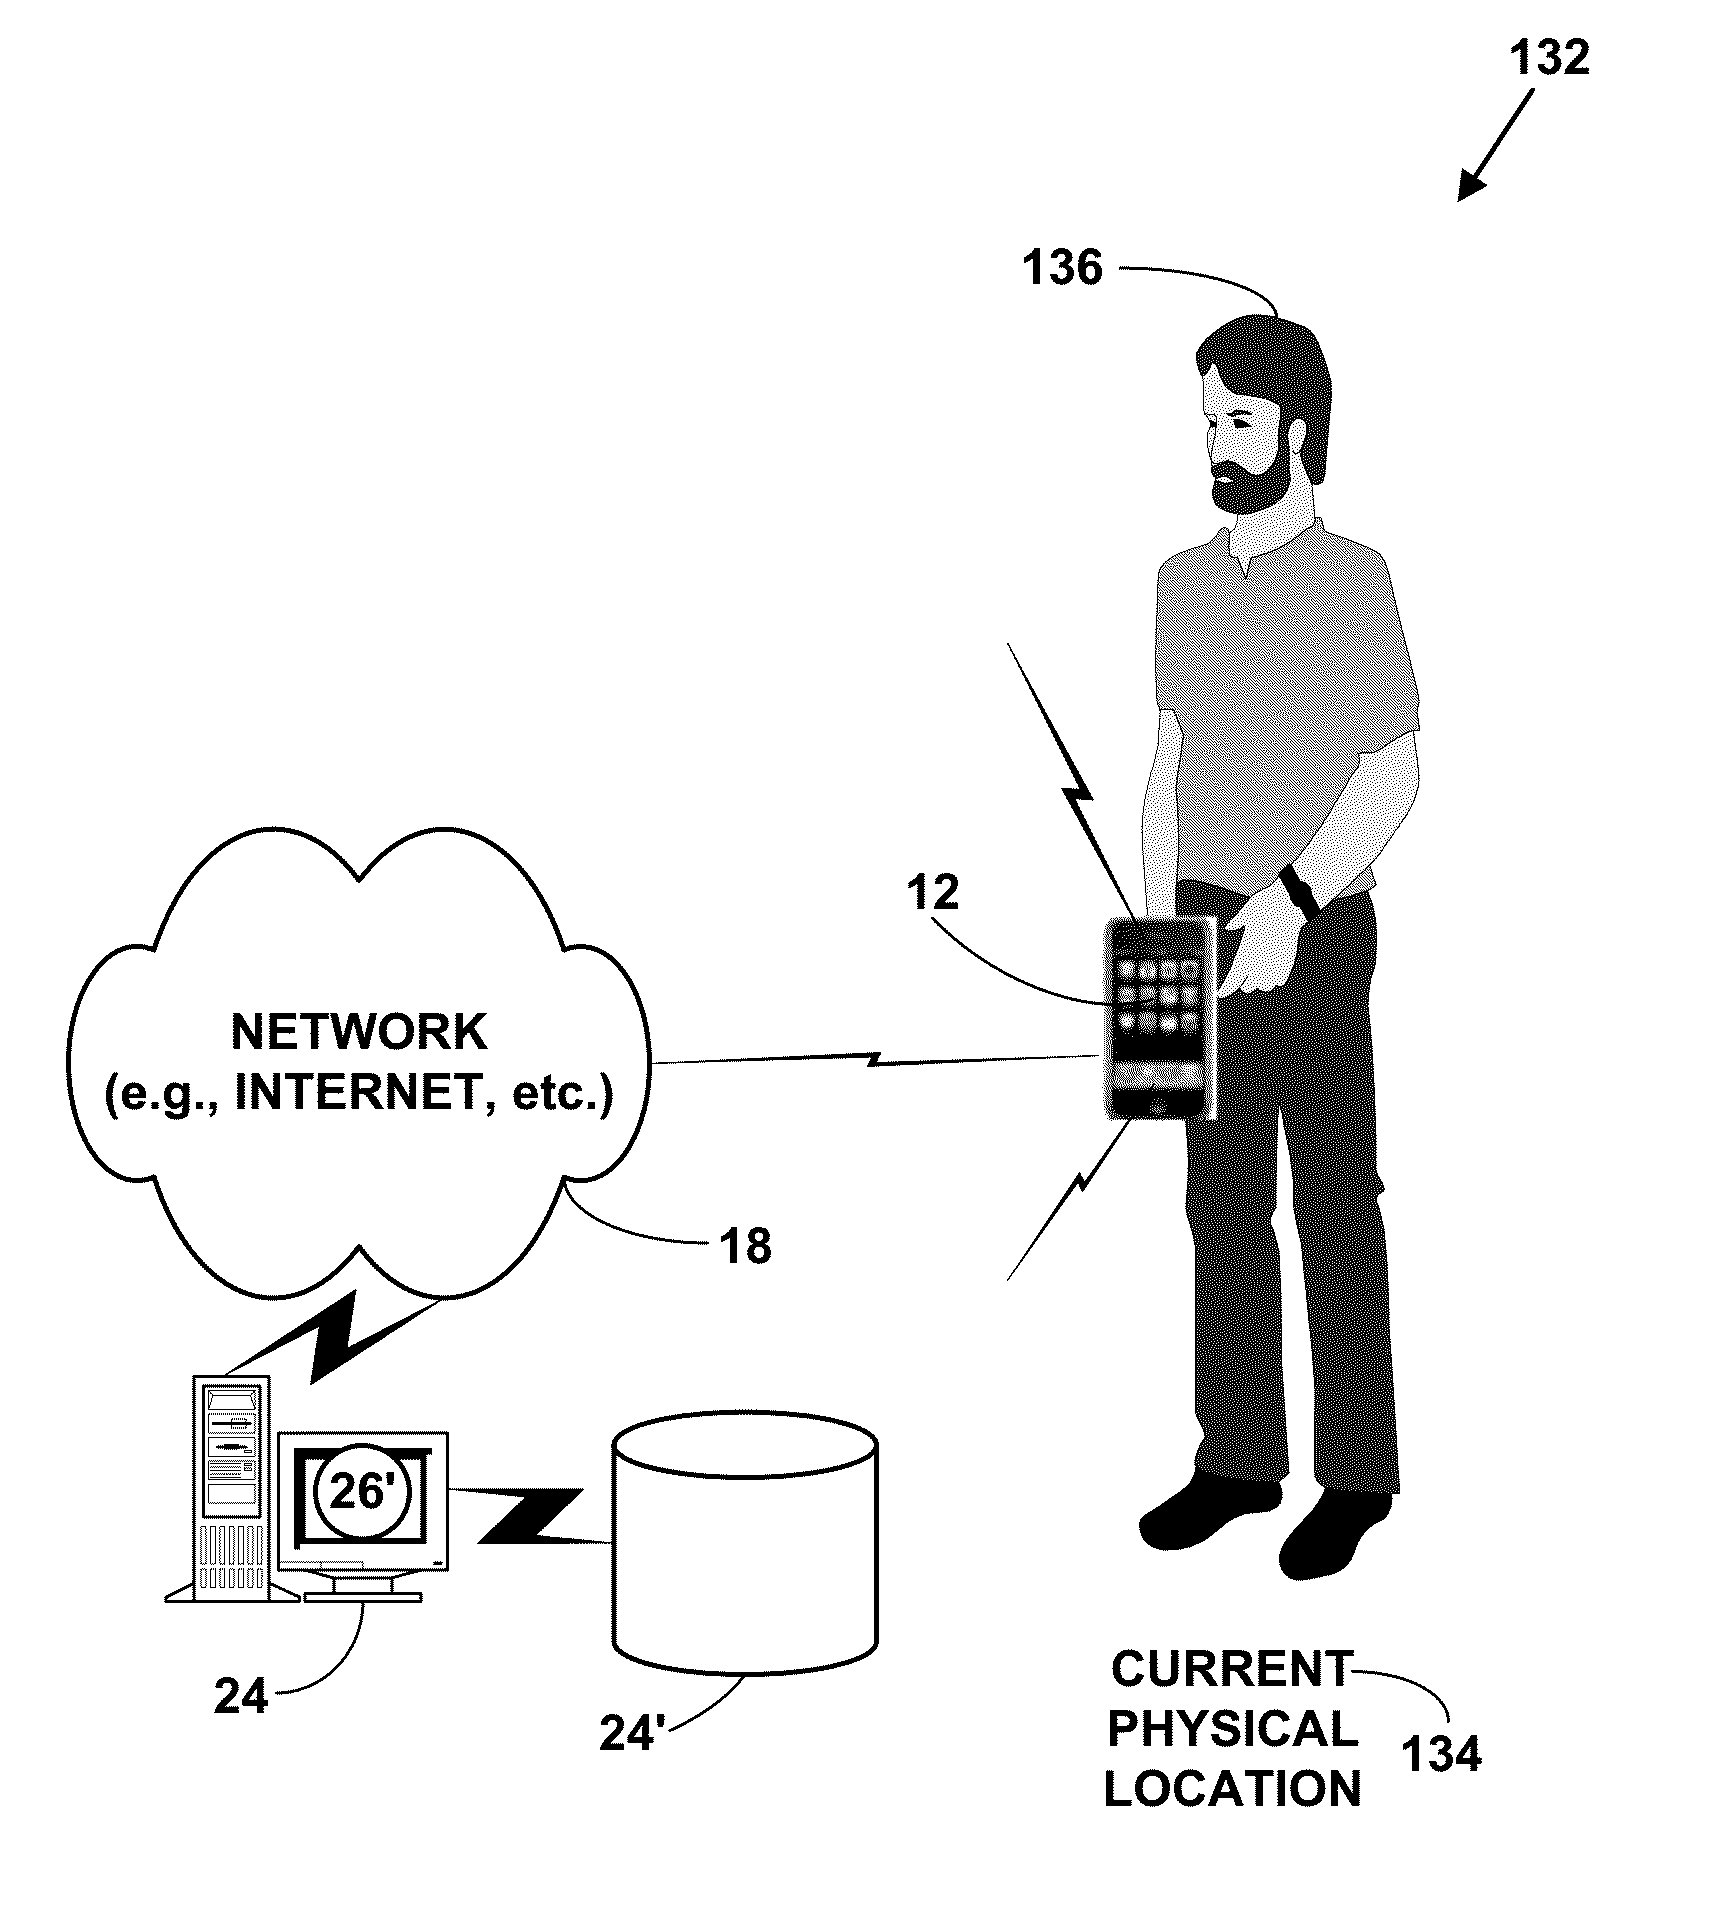 Method and system for an emergency location information service (e-lis) from automated vehicles